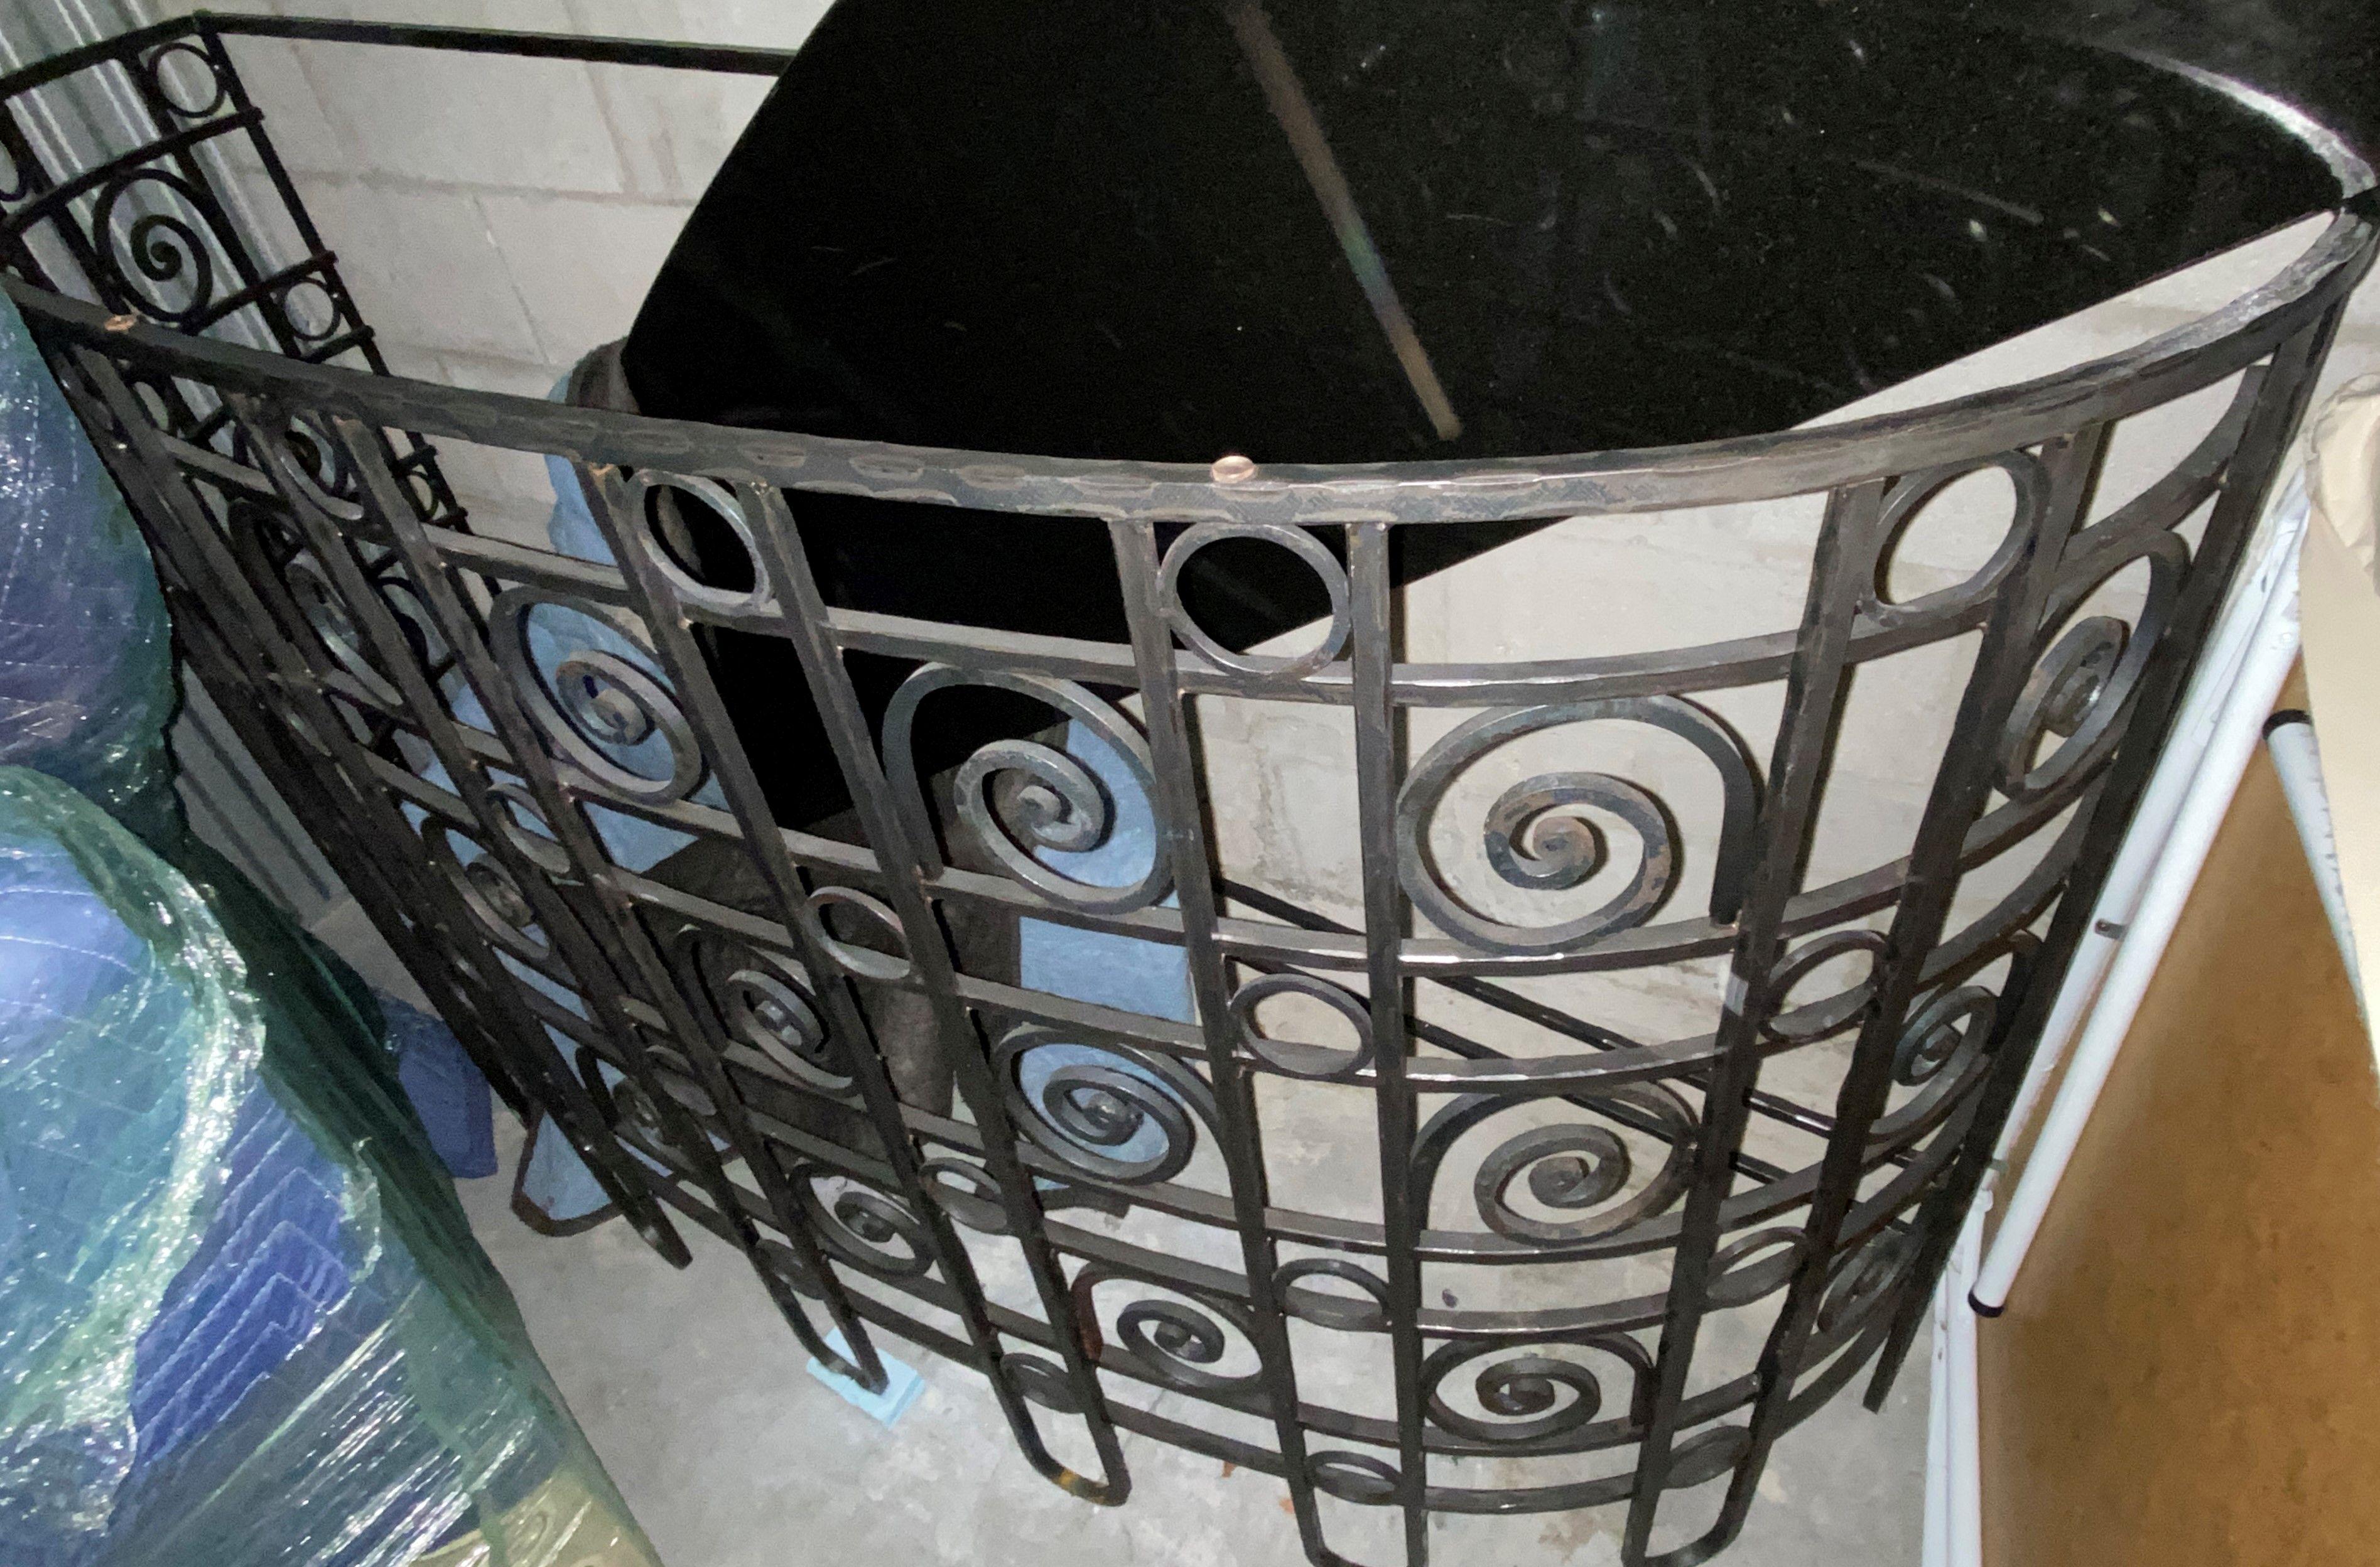 Large Wrought Iron Console Table with Black Granite Top. The Table is Heavy and was taken apart for